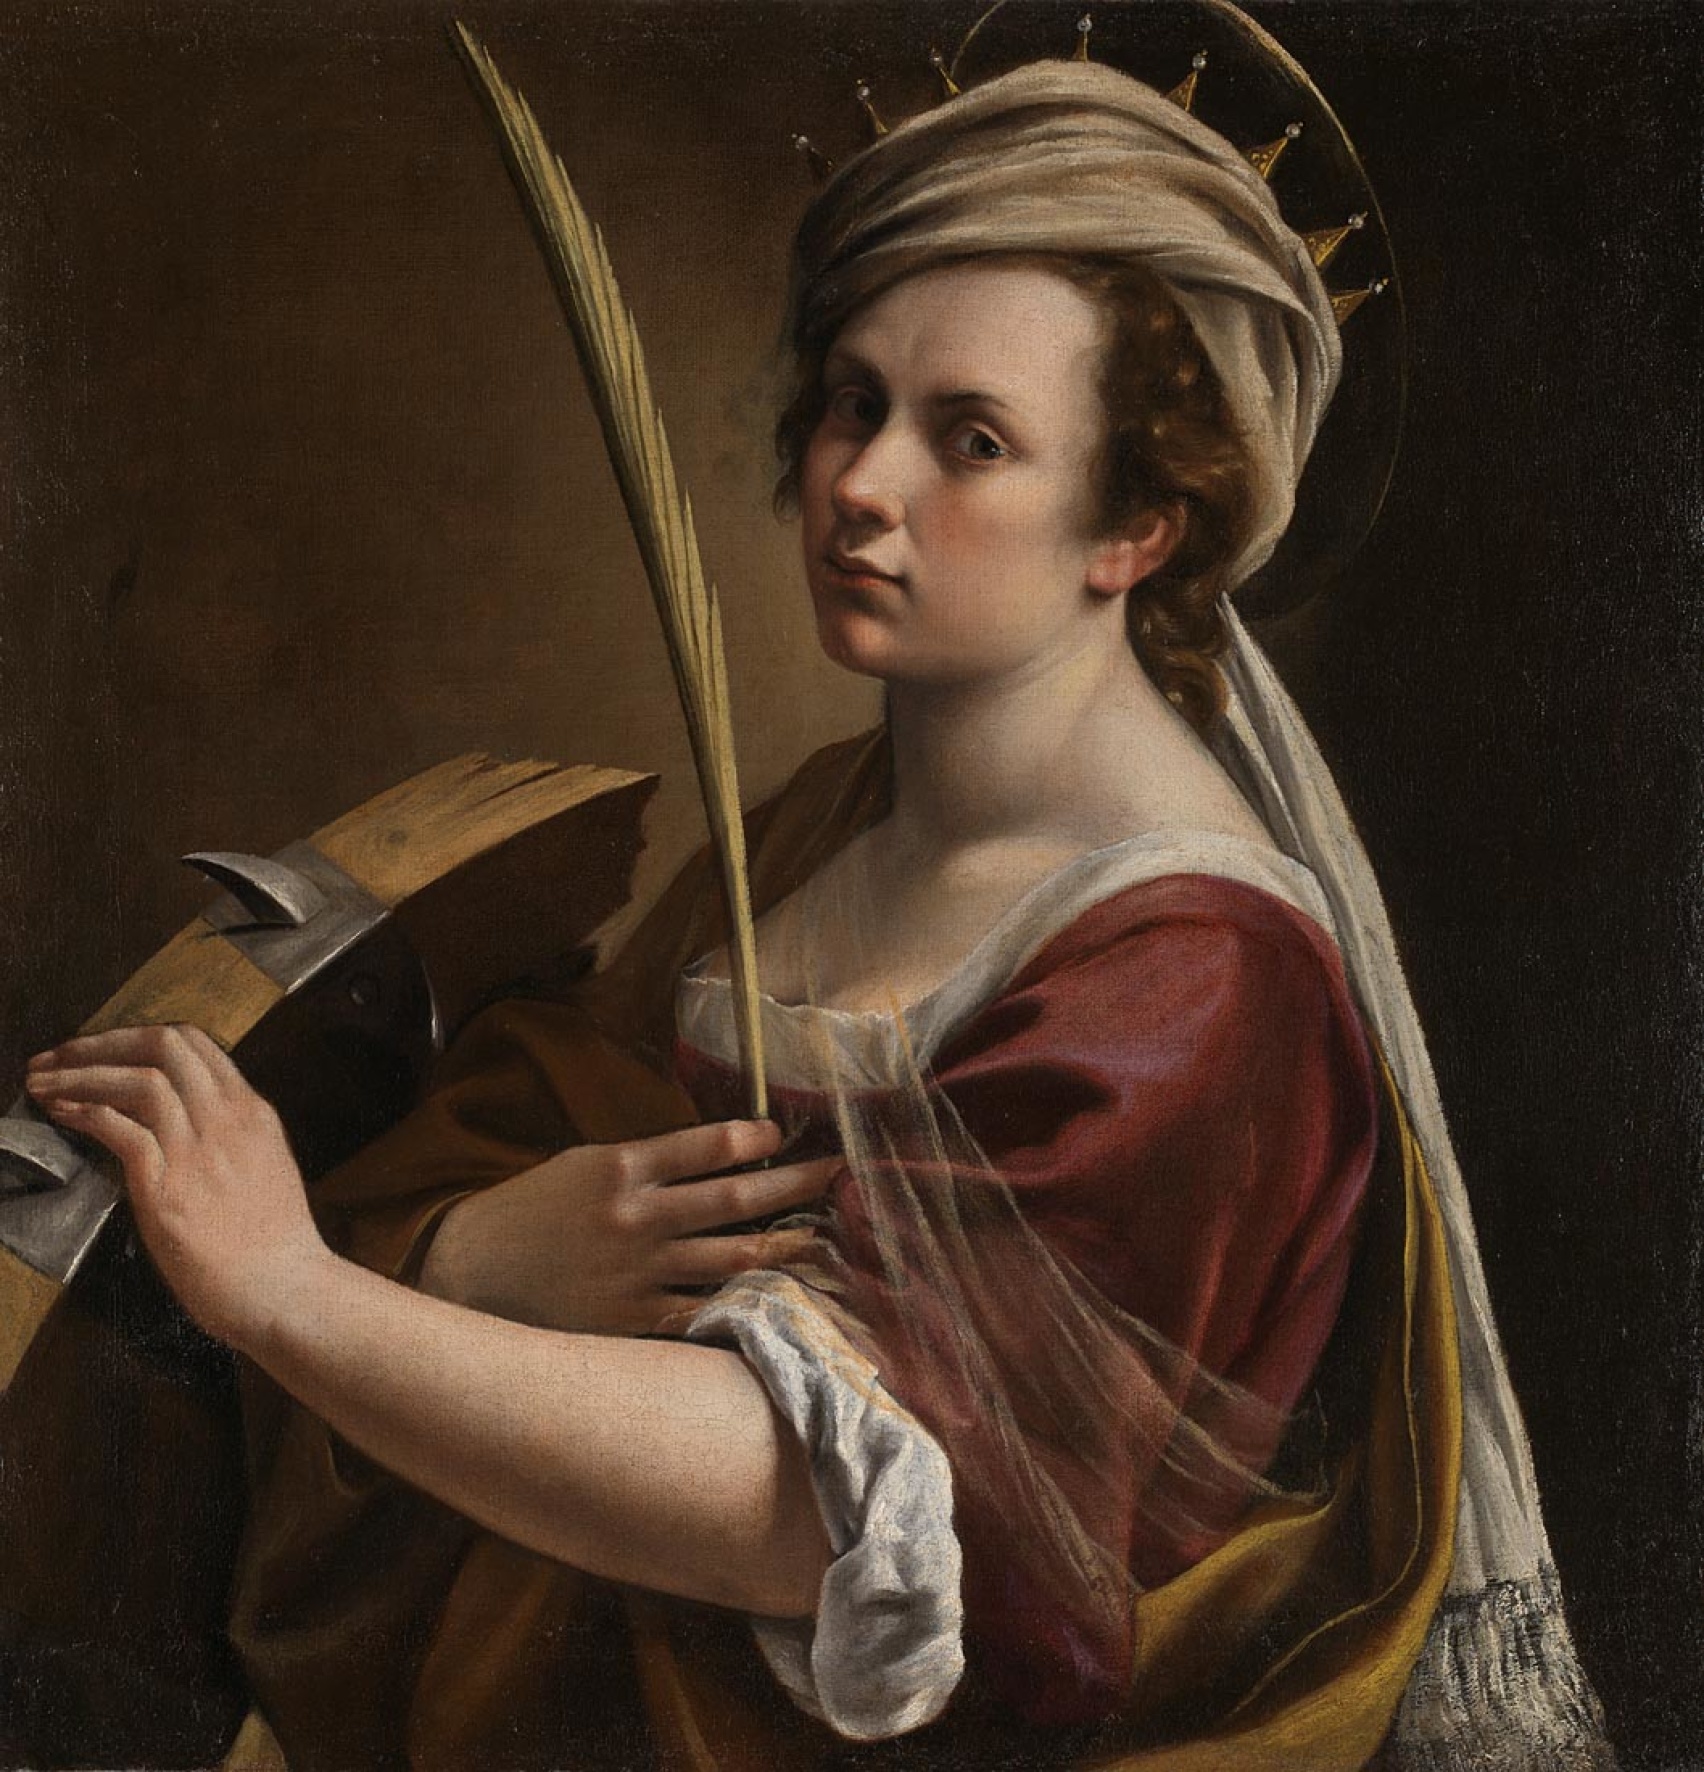 Artemisia Gentileschi. Self Portrait as Saint Catherine of Alexandria. Credit: © The National Gallery, London. Bought with the support of the American Friends of the National Gallery, the National Gallery Trust, Art Fund (through the legacy of Sir Denis Mahon), Lord and Lady Sassoon, Lady Getty, Hannah Rothschild CBE, Dr Anita Klesch, Mr A Gary Klesch and other donors including those who wish to remain anonymous, 2018.